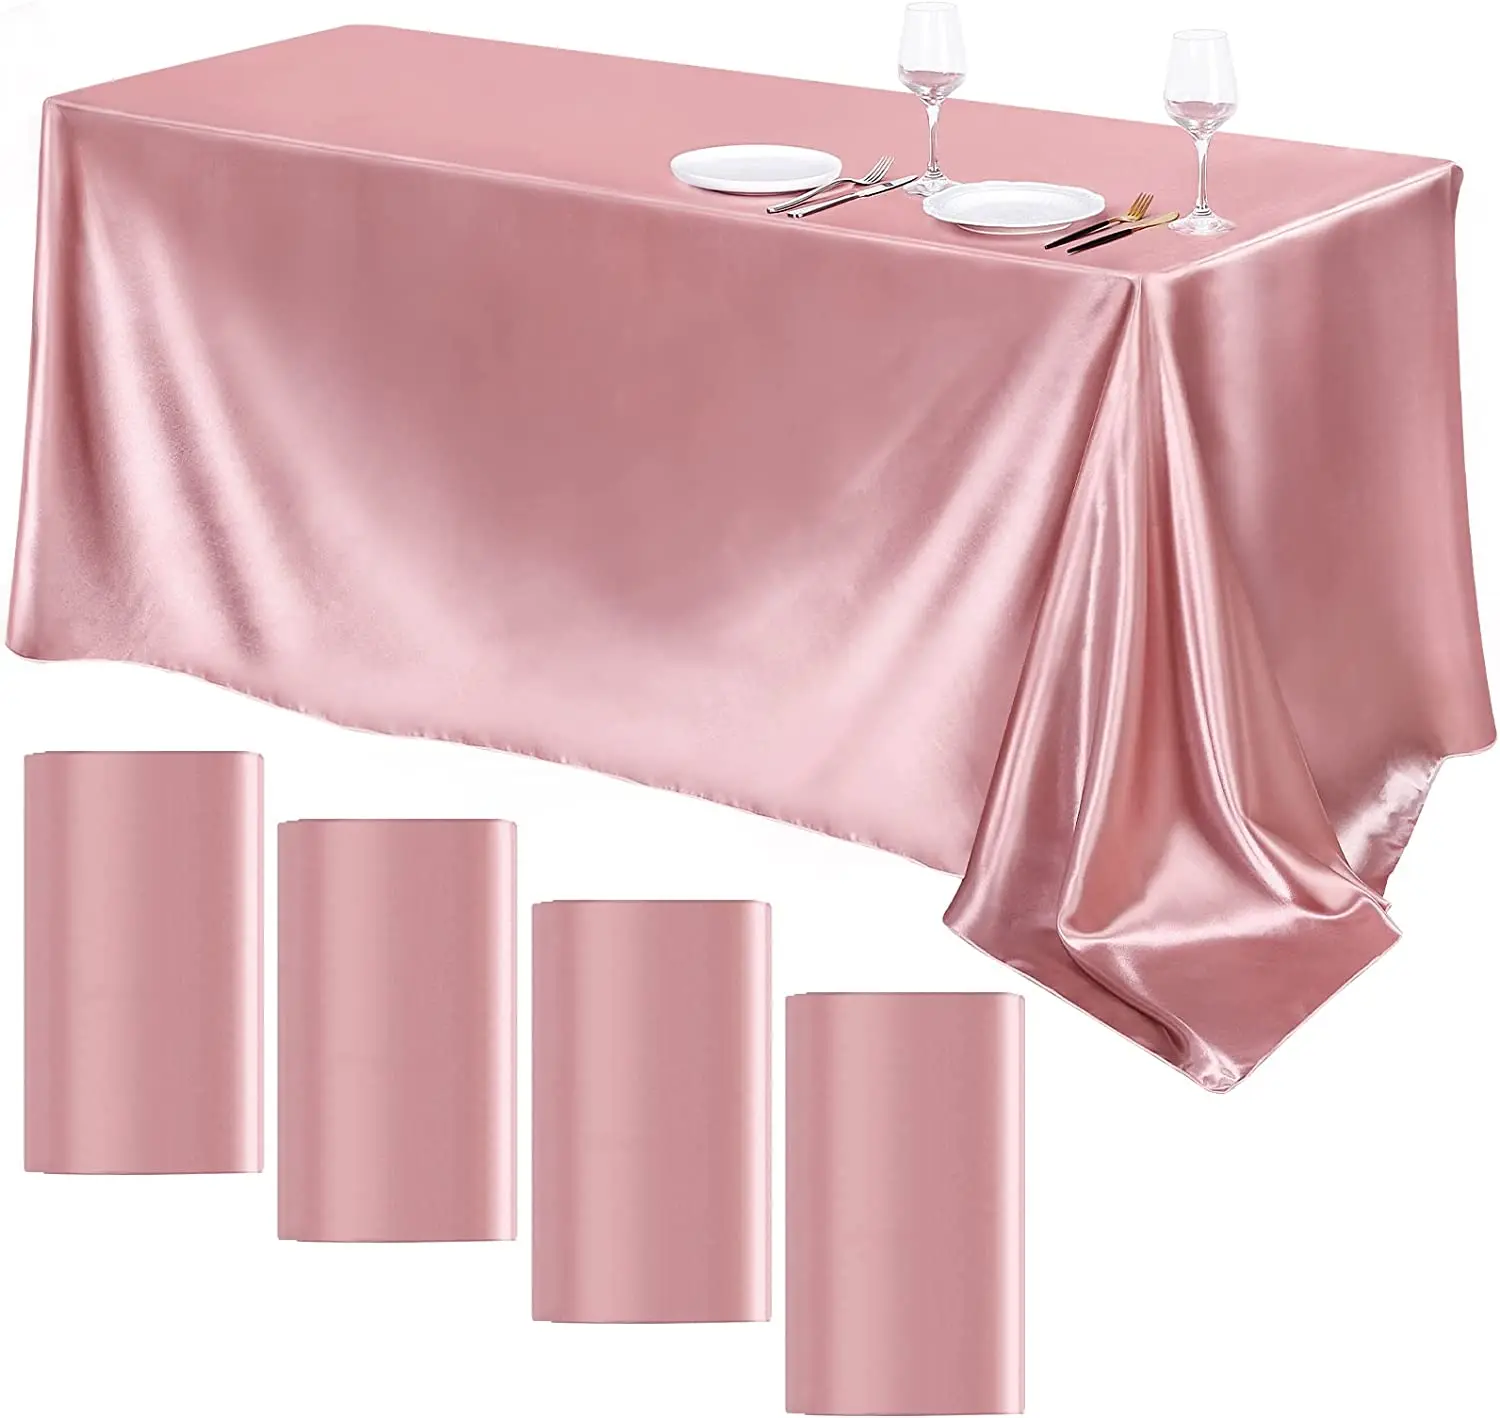 

Bright Anniversary Satin Wedding Banquet Table Smooth Cover 57x102inch For Wedding Tablecloth Rectangle Decor Dining Table Silk